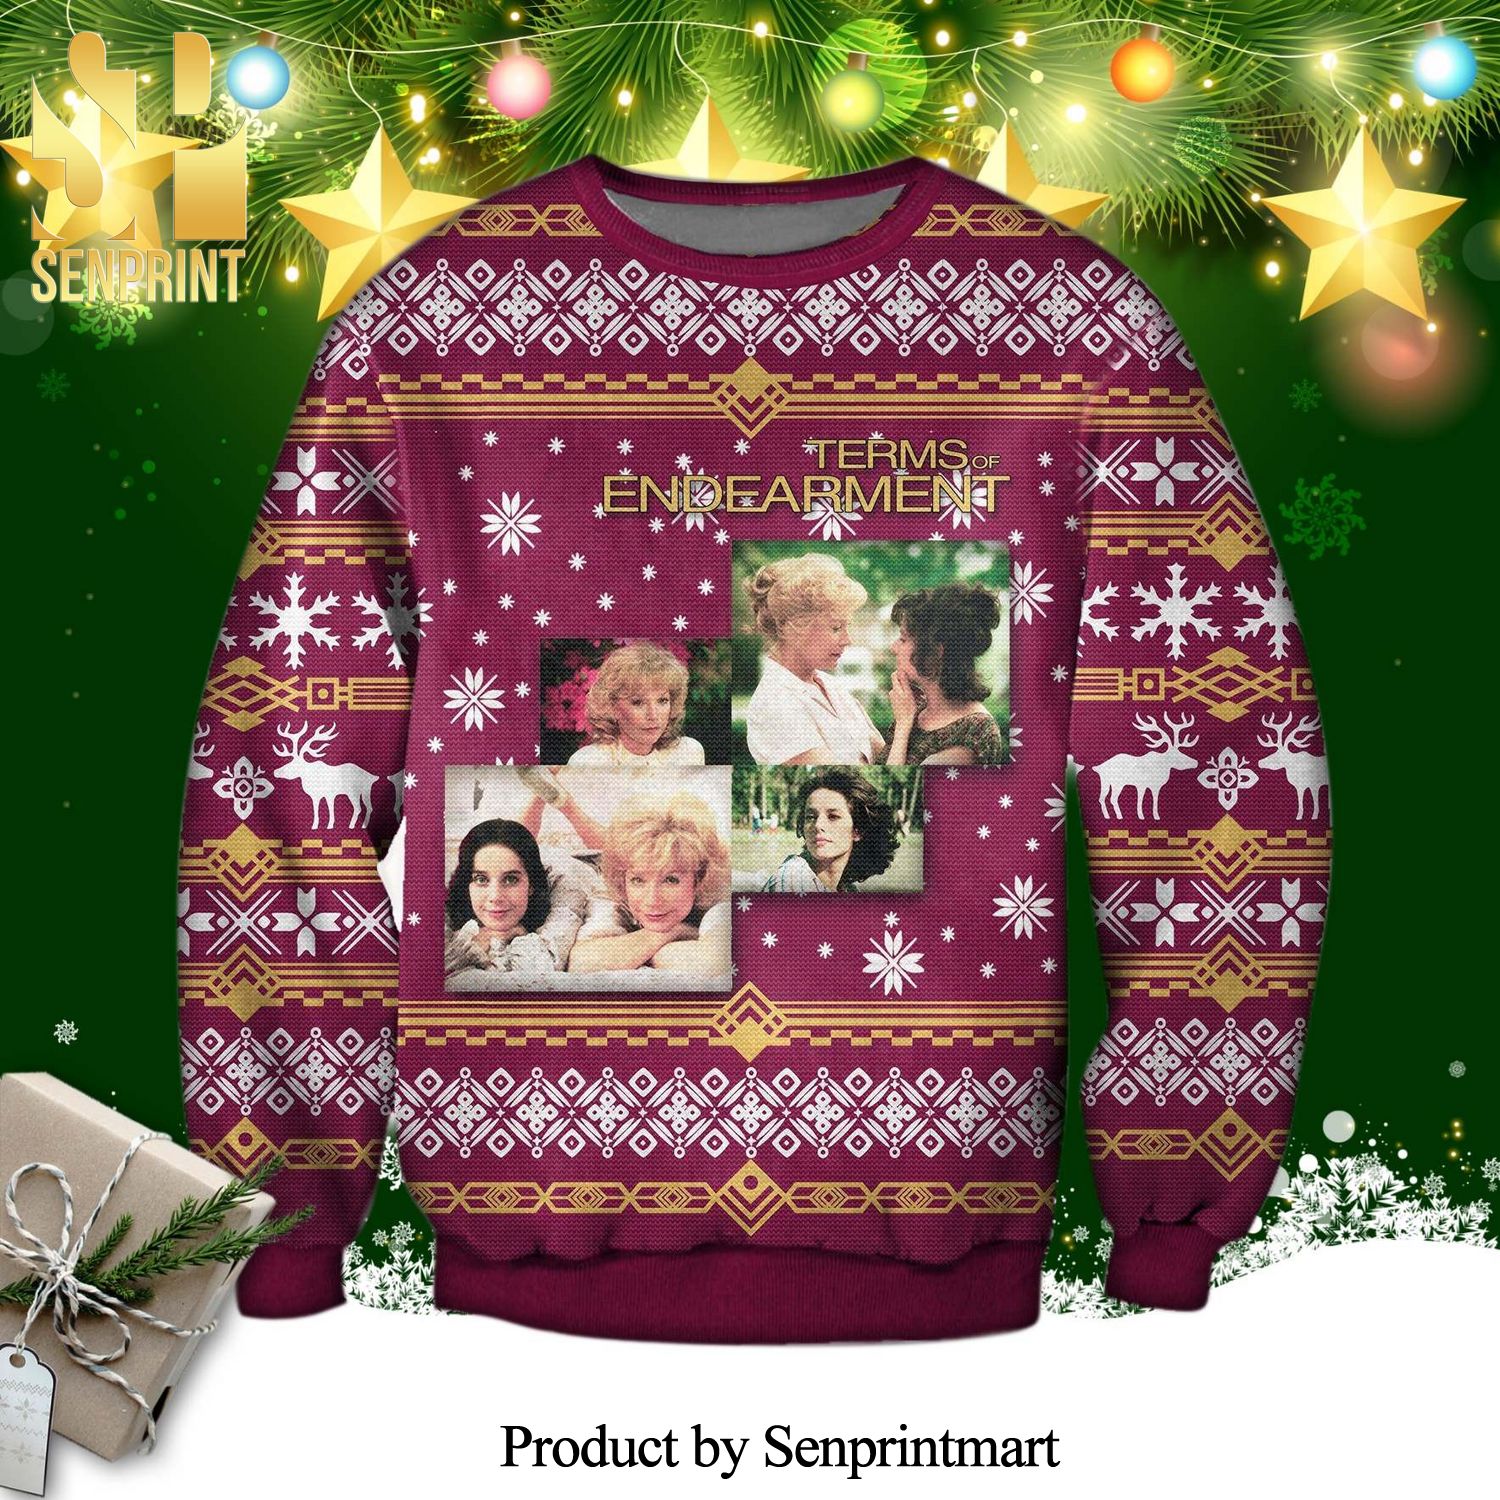 Aurora Greenway Emma Greenway Horton Terms Of Endearment Knitted Ugly Christmas Sweater